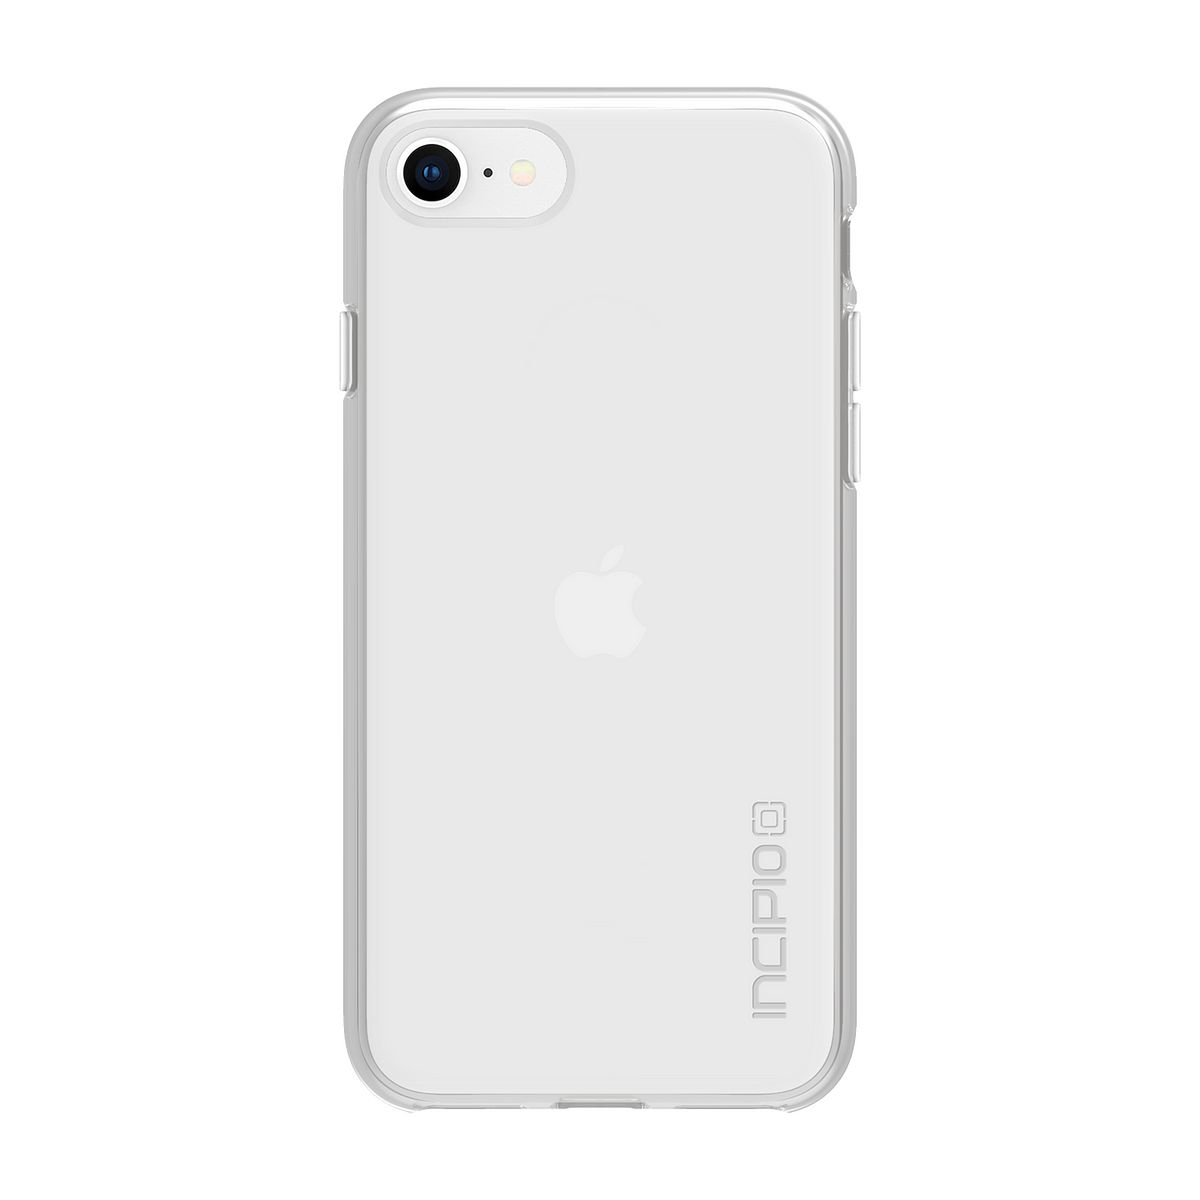 Backcover, iPhone SE (2020);iPhone INCIPIO iPhone 7; (2022); iPhone Apple, iPhone 8; Clear 6s/6, IPH-1480-CLR, SE